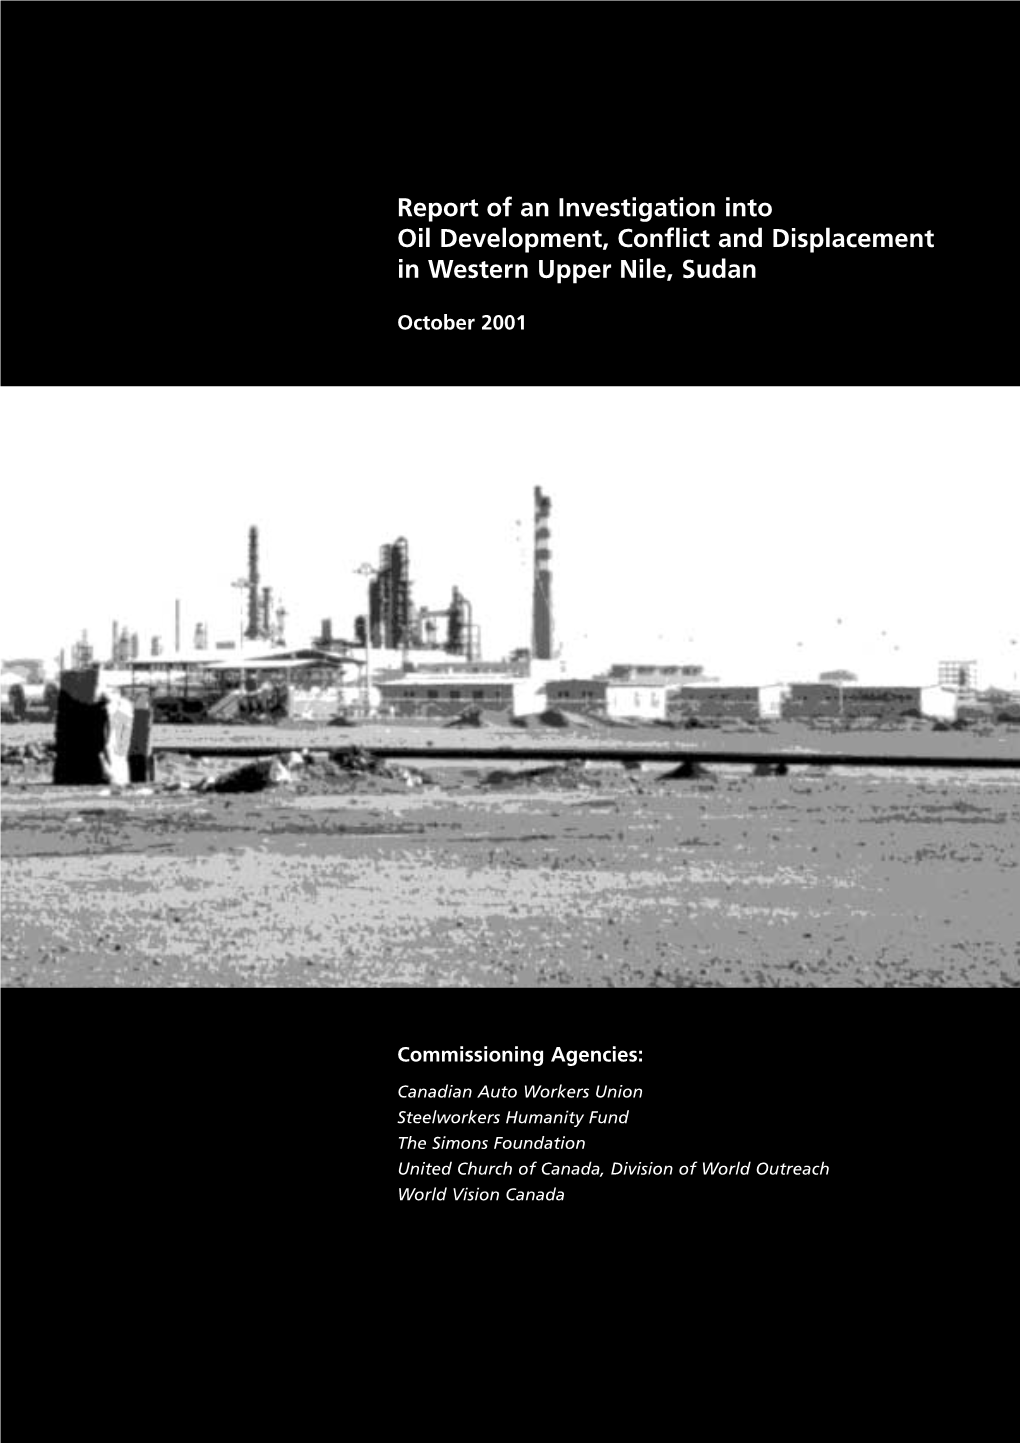 Report of an Investigation Into Oil Development, Conflict and Displacement in Western Upper Nile, Sudan